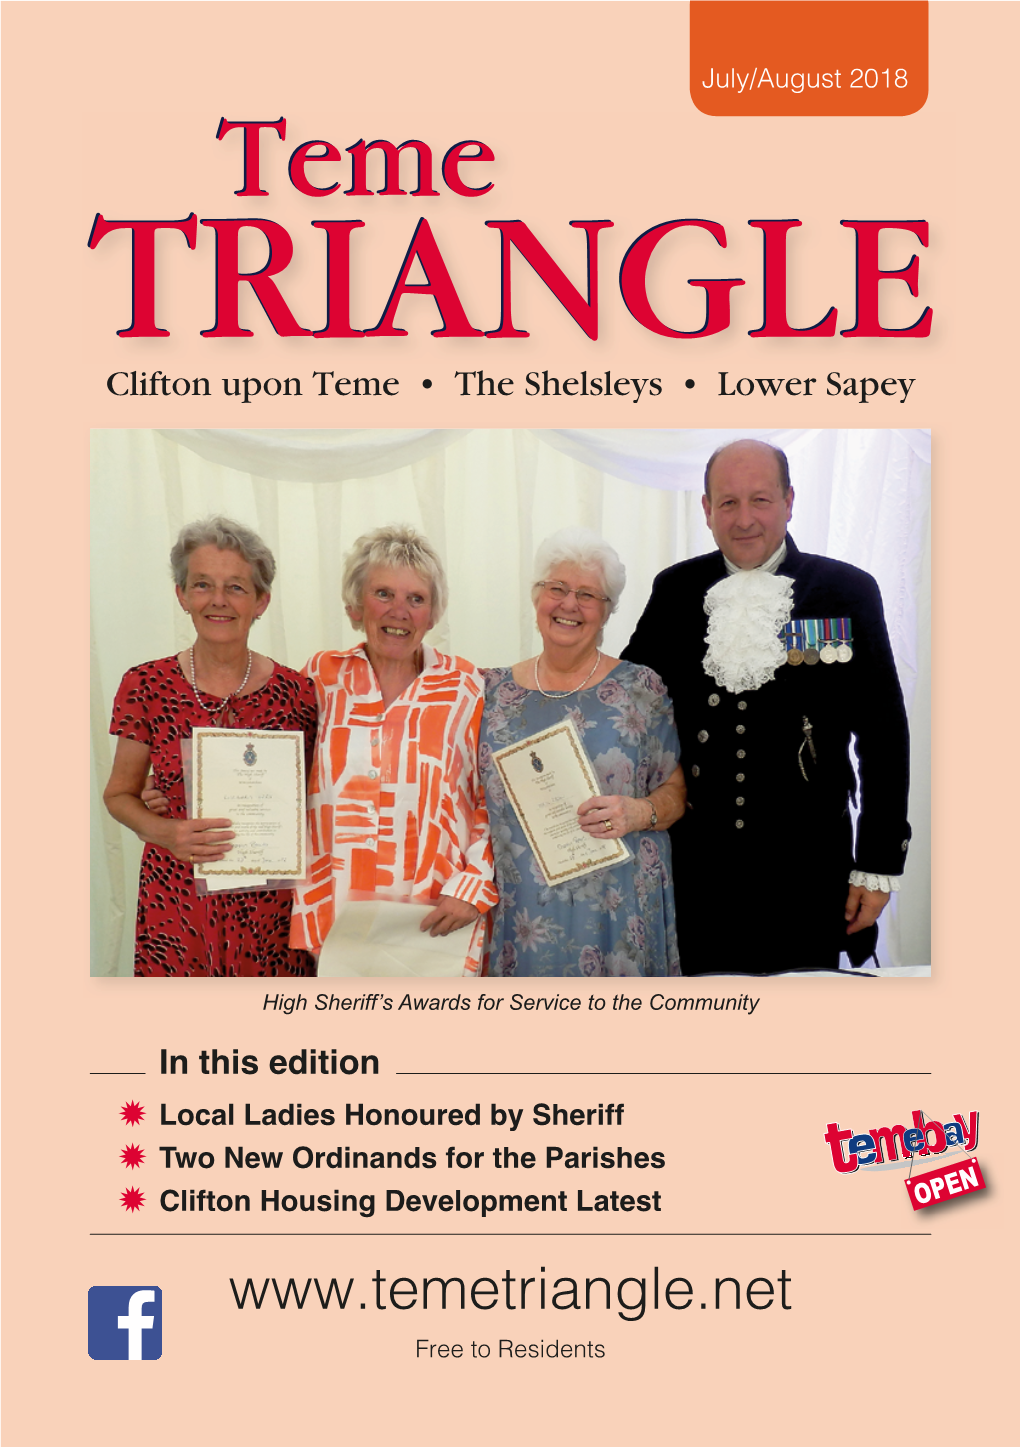 July/August 2018 Temeteme TRIANGLETRIANGLE Clifton Upon Teme • the Shelsleys • Lower Sapey